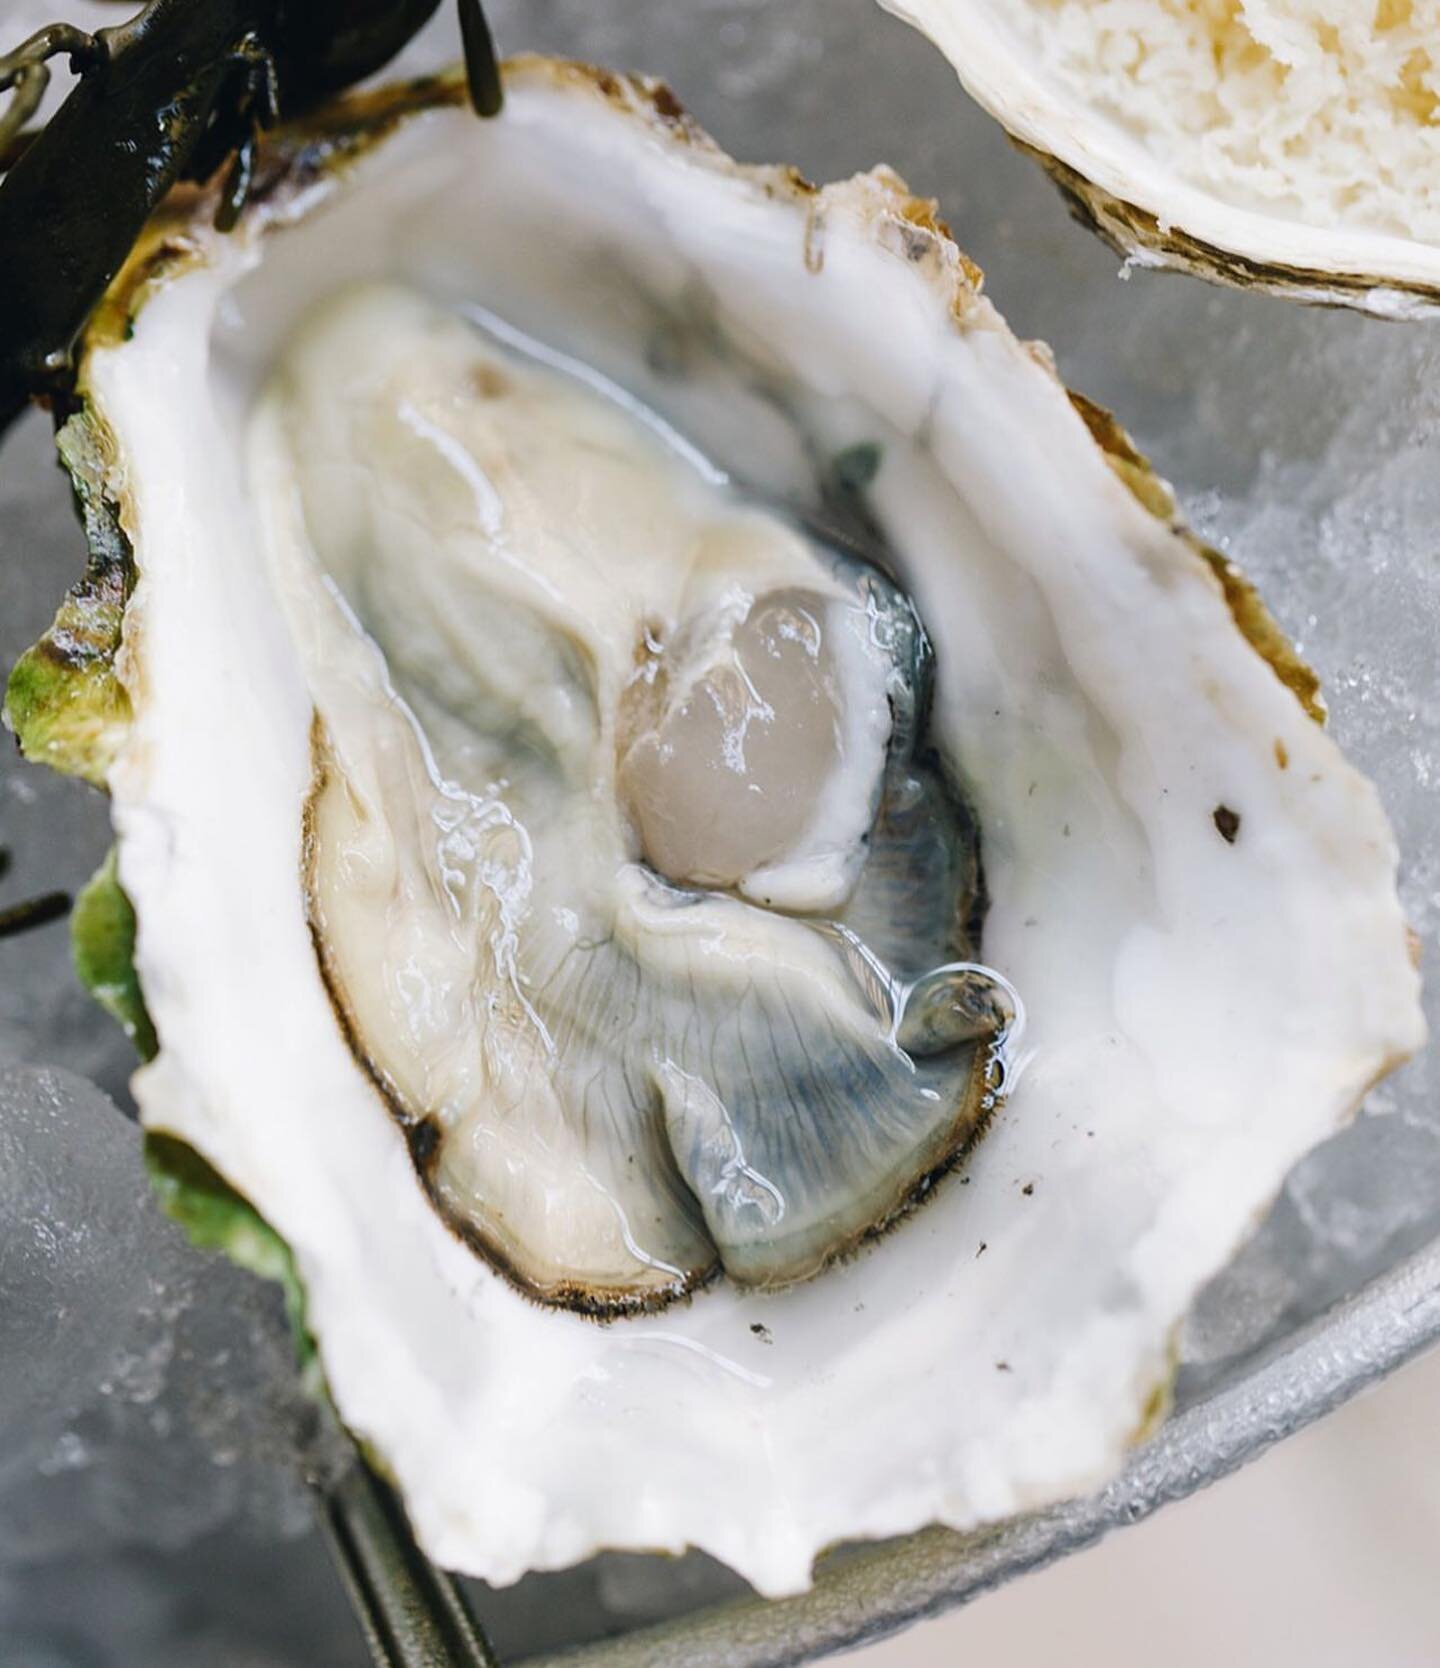 Have you tried our variety of fresh oysters?

Every morning, we prepare the freshest oysters sourced from various areas on the West &amp; East Coast. 
Our sauces are scratch made &amp; prepared in house. 

.
.
.
.
.
#yvr#vancity#VancouverFoodie#white